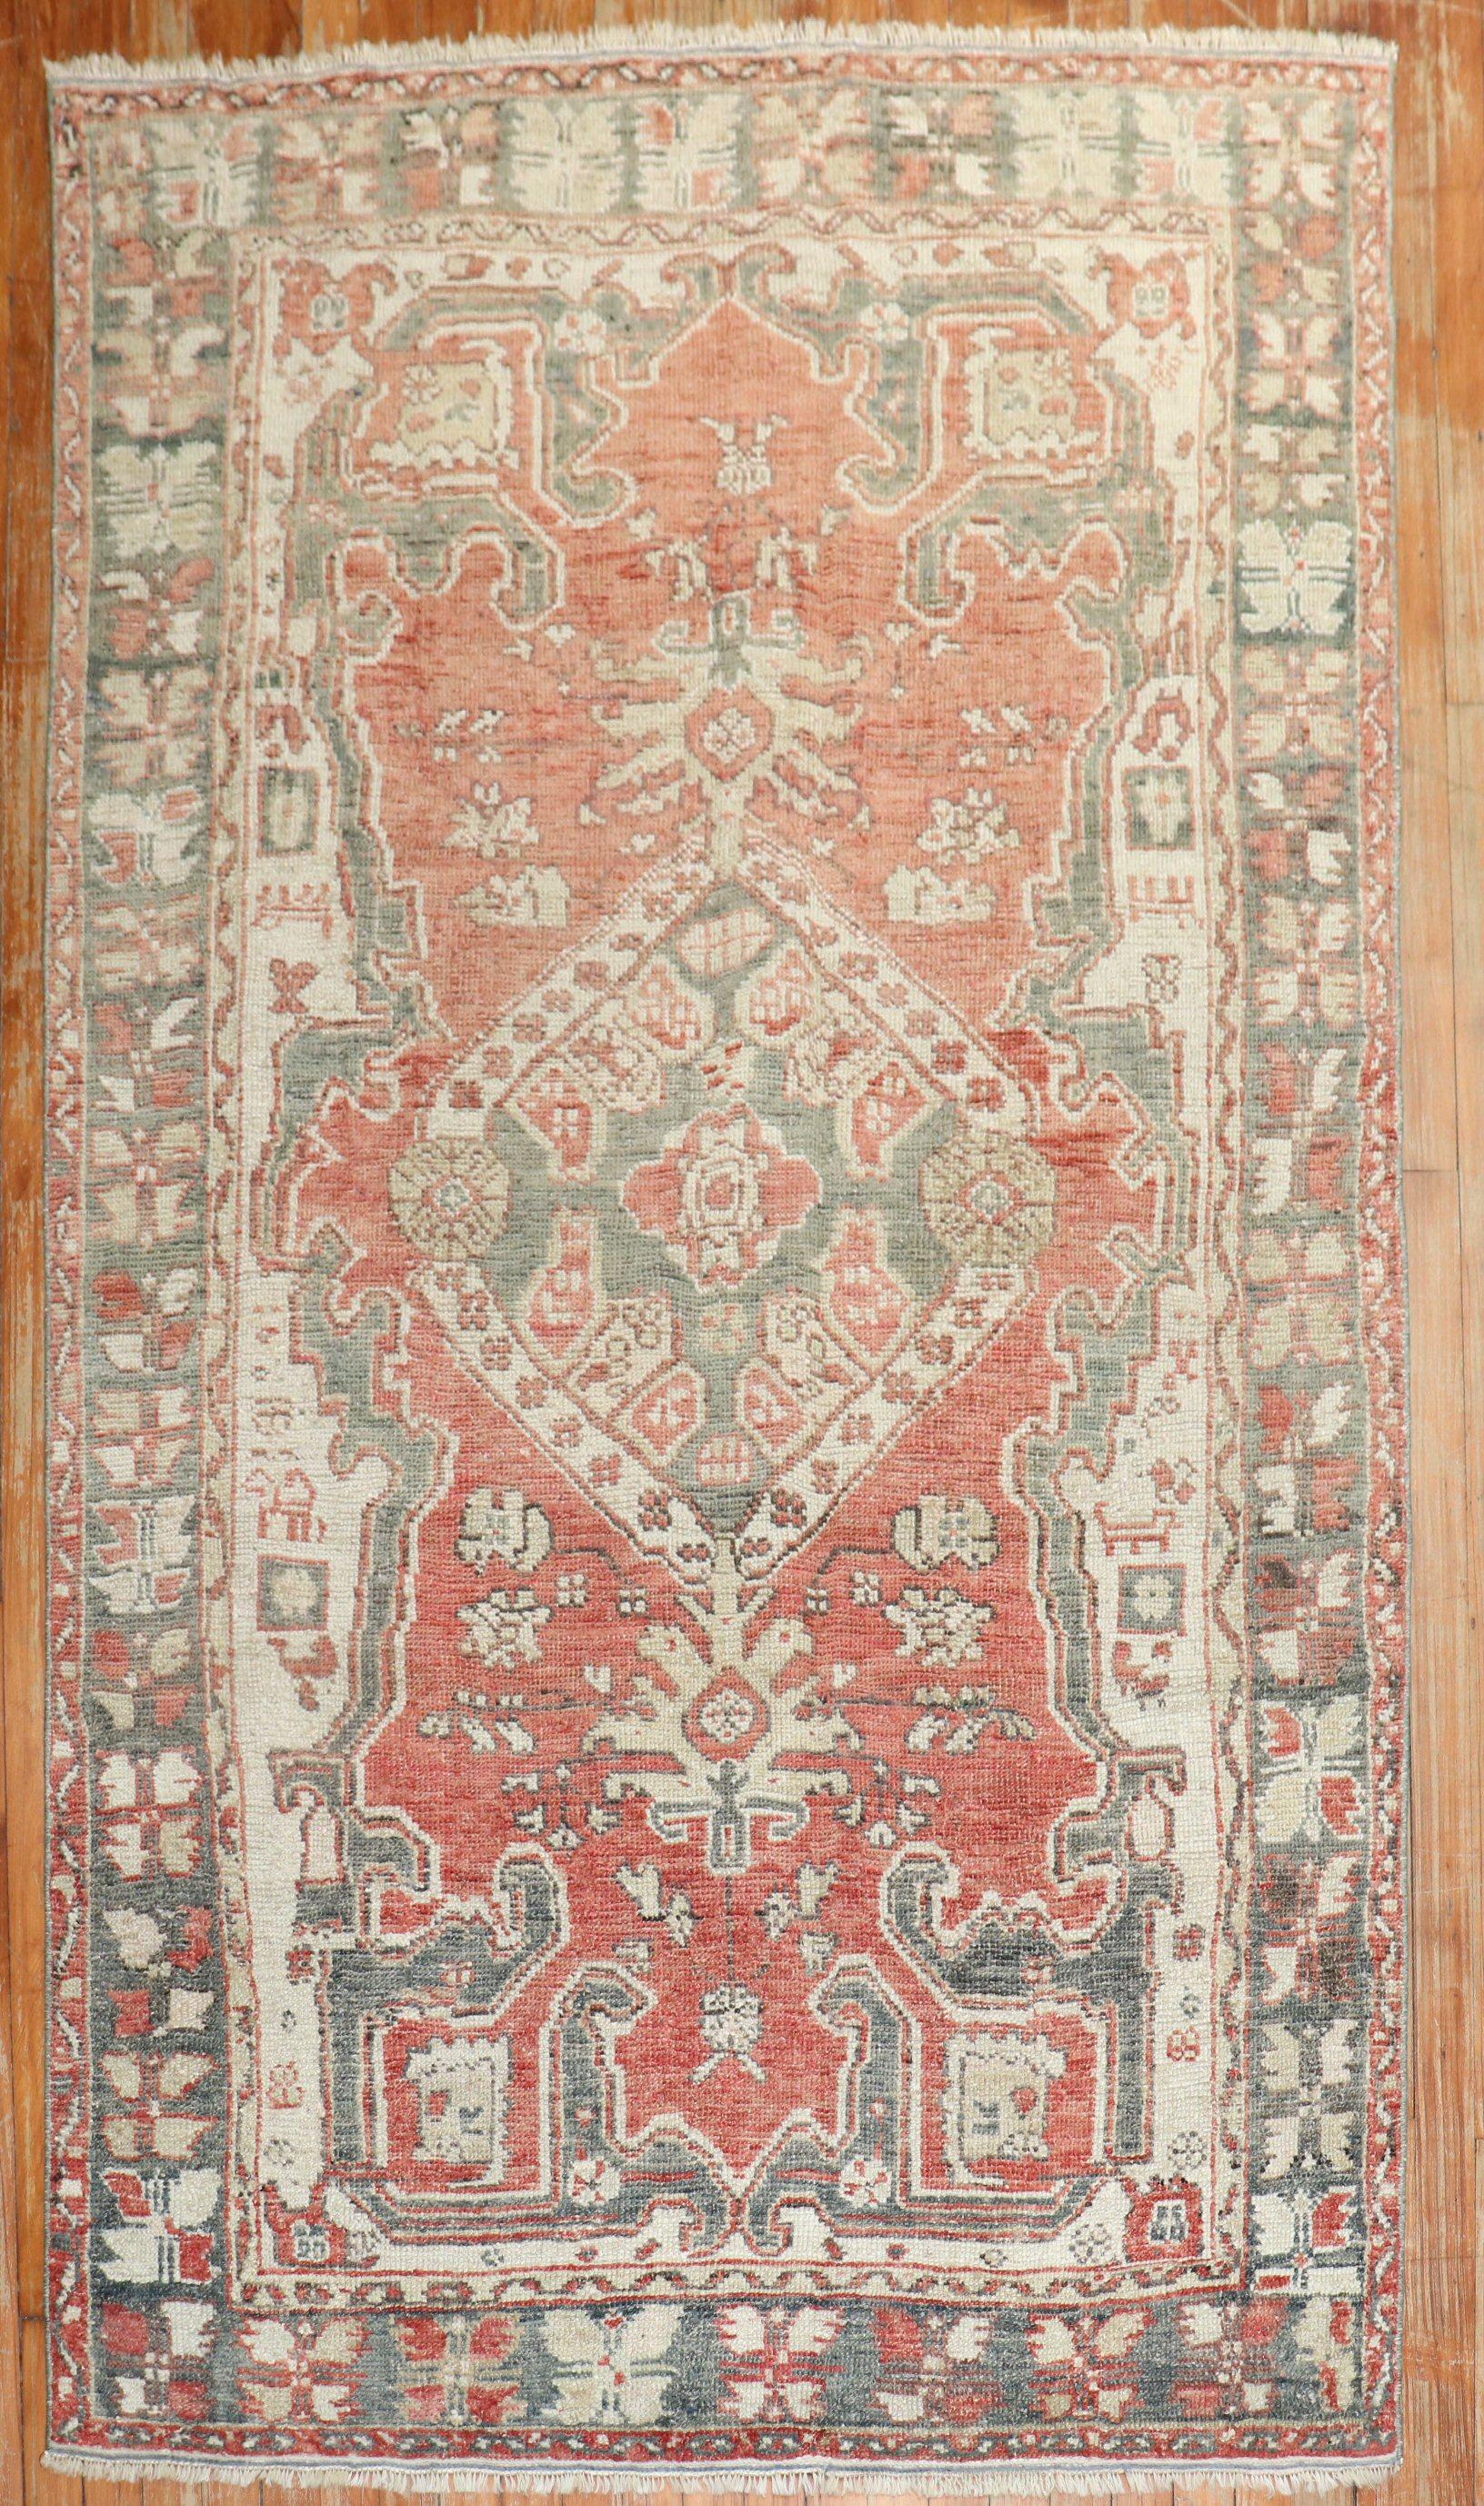 A vintage Turkish Kula carpet from the 2nd quarter of the 20th century in brick red, ivory, brown and gray

Measures: 4'3'' x 7'4''.